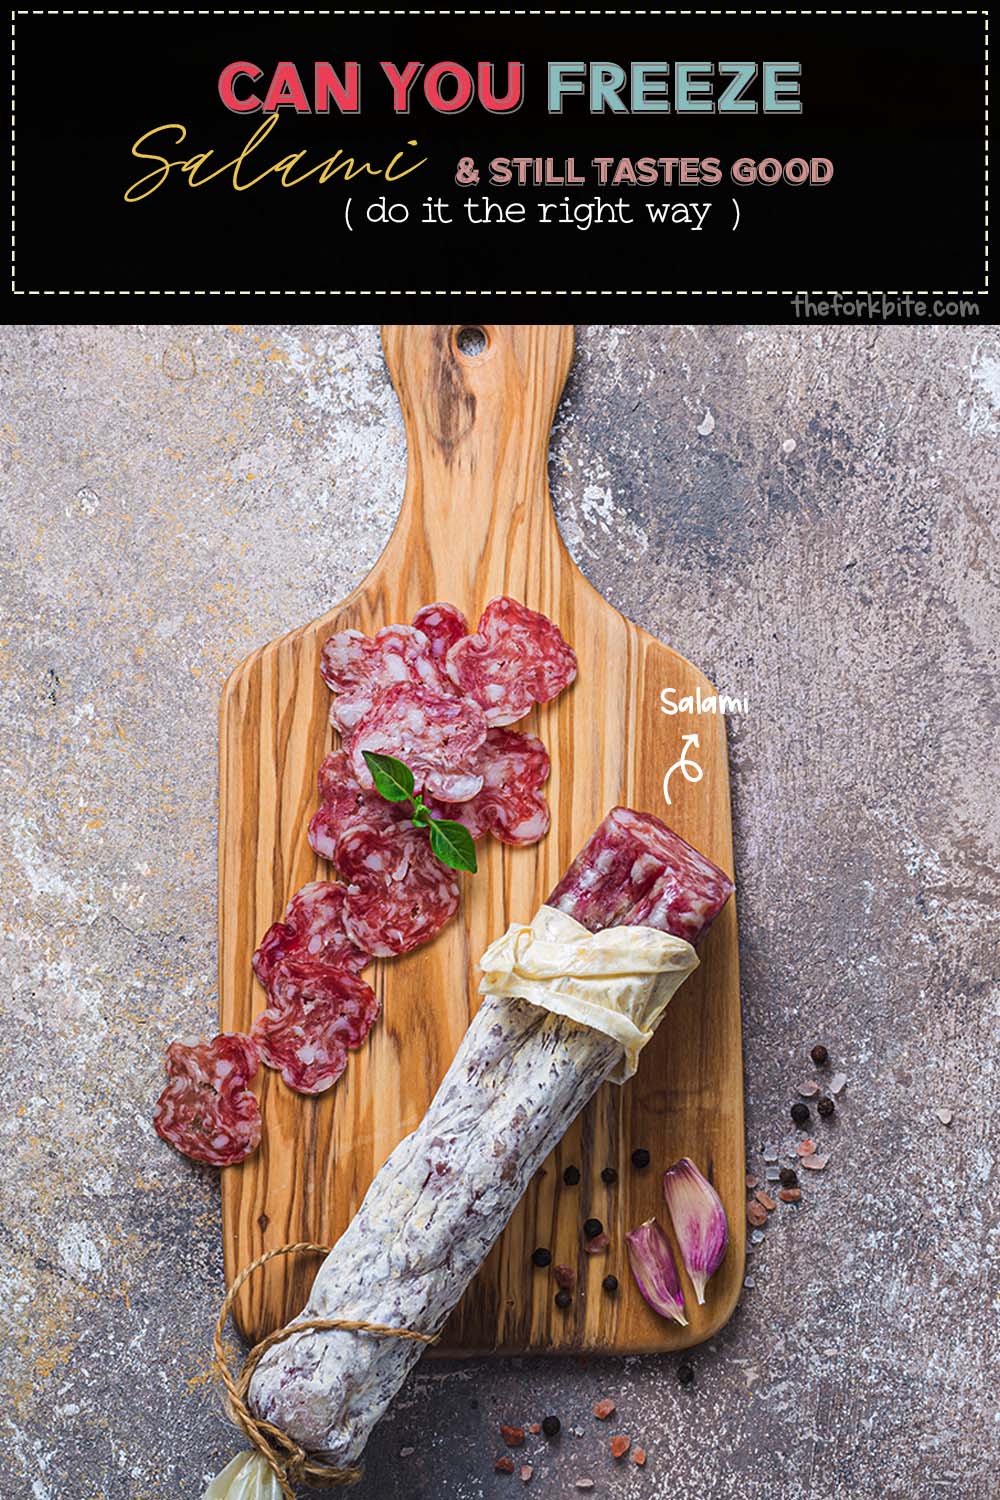 If you prepare it properly by wrapping it to avoid both dryness and excess moisture, salami, both whole or sliced, will last for as long as six months in a freezer and, when unopened, as long as six weeks in your fridge.